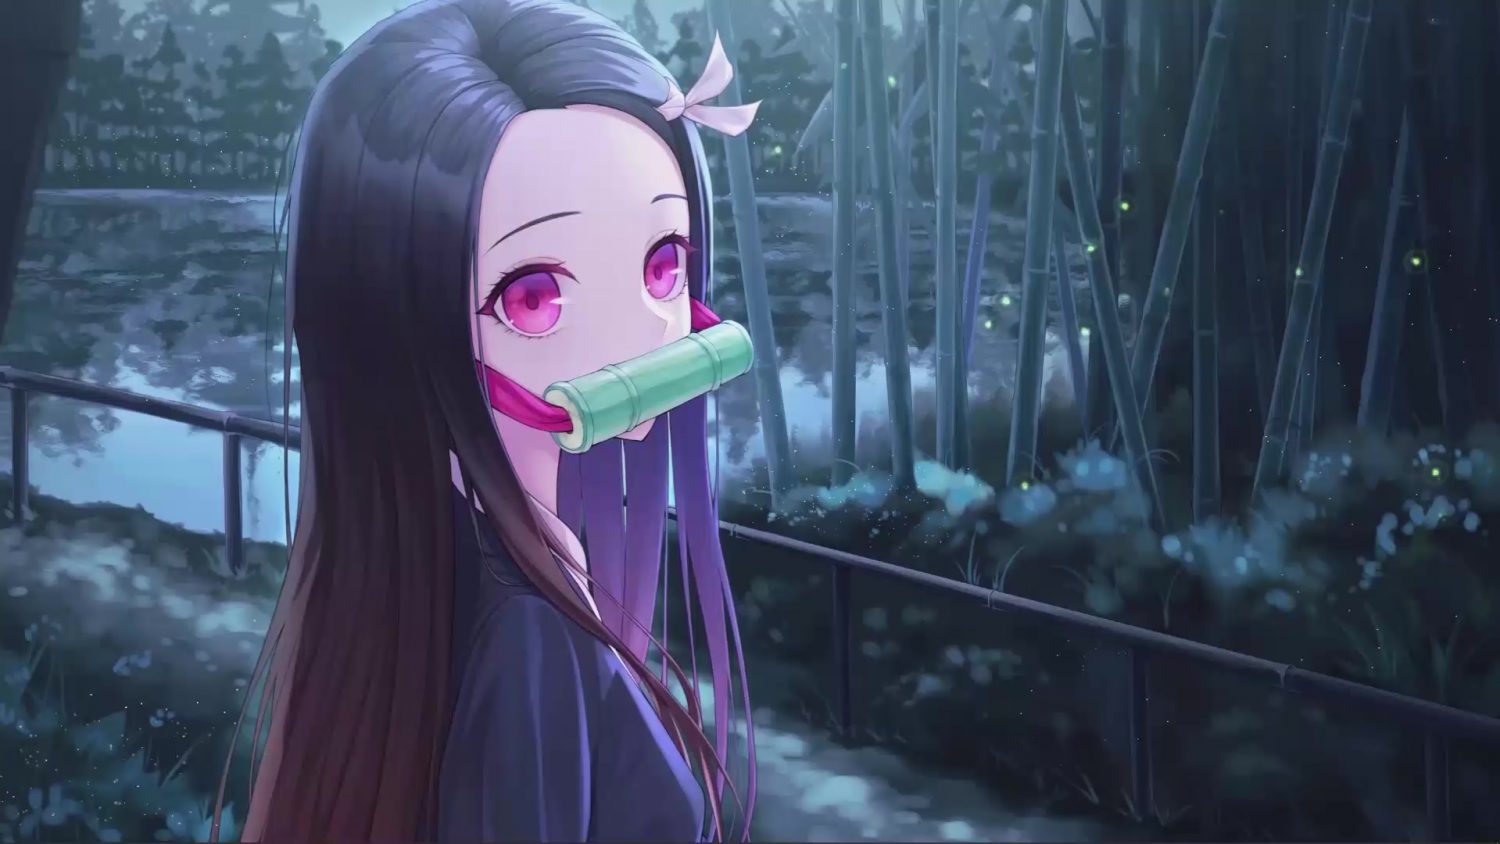 Live Wallpapers tagged with Nezuko